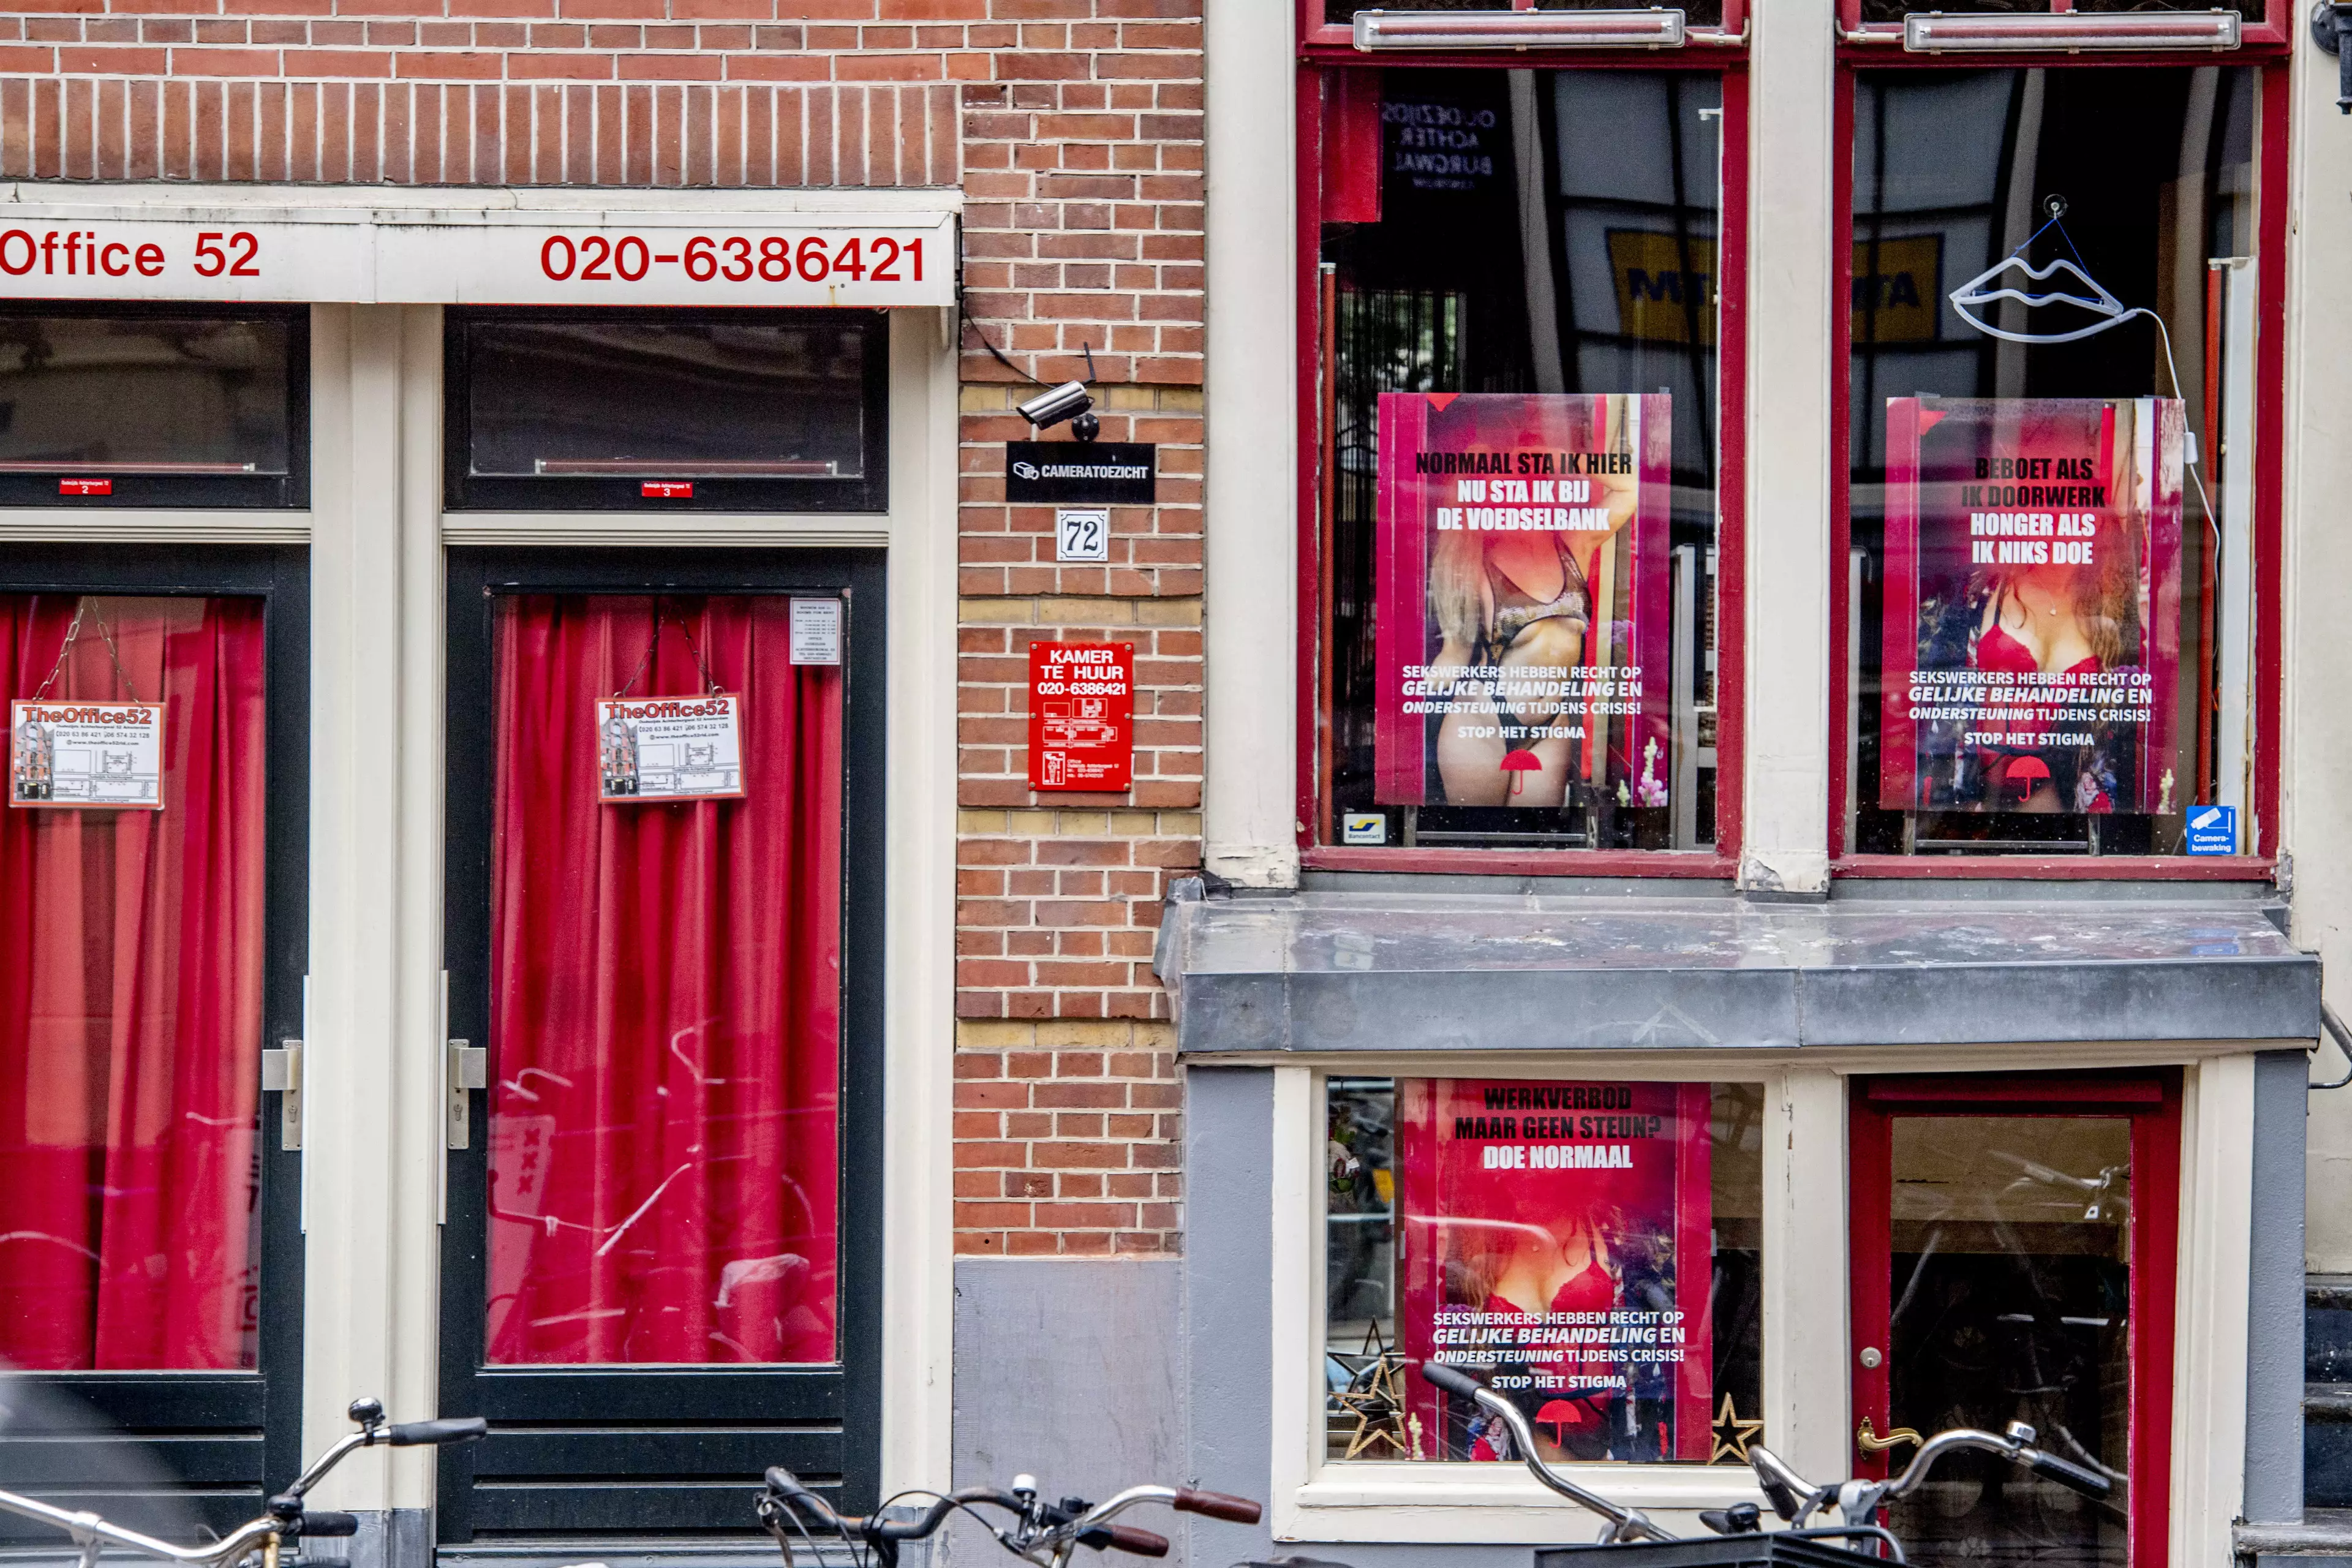 The world famous red light district in Amsterdam is due to reopen for business on Wednesday.